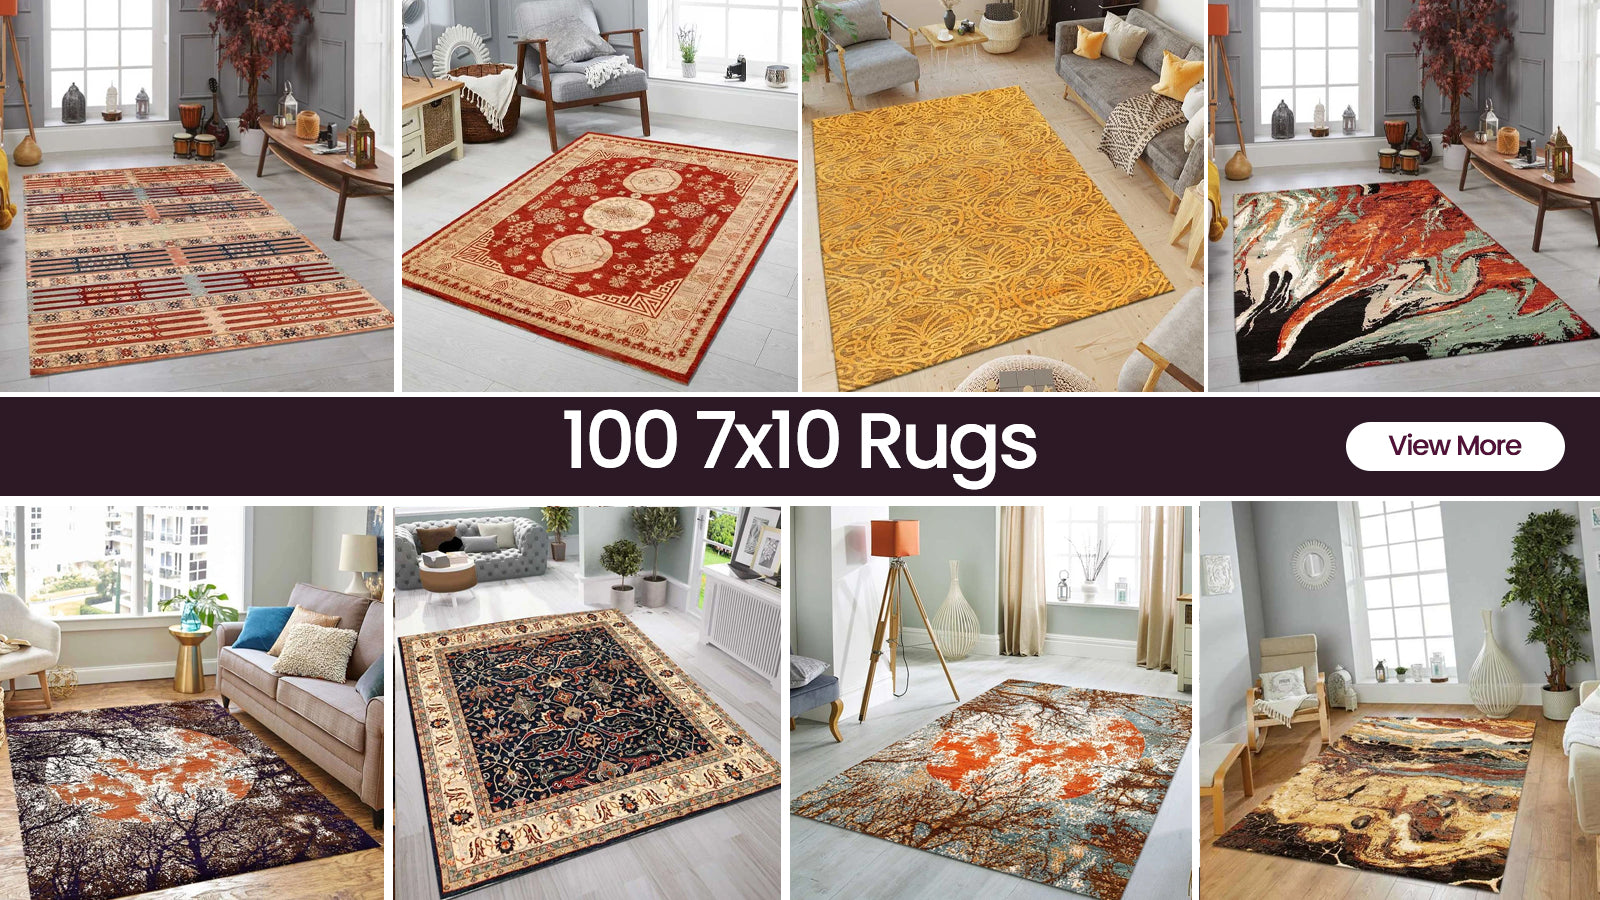 7x10 Traditional Black Large Area Rugs for Living Room